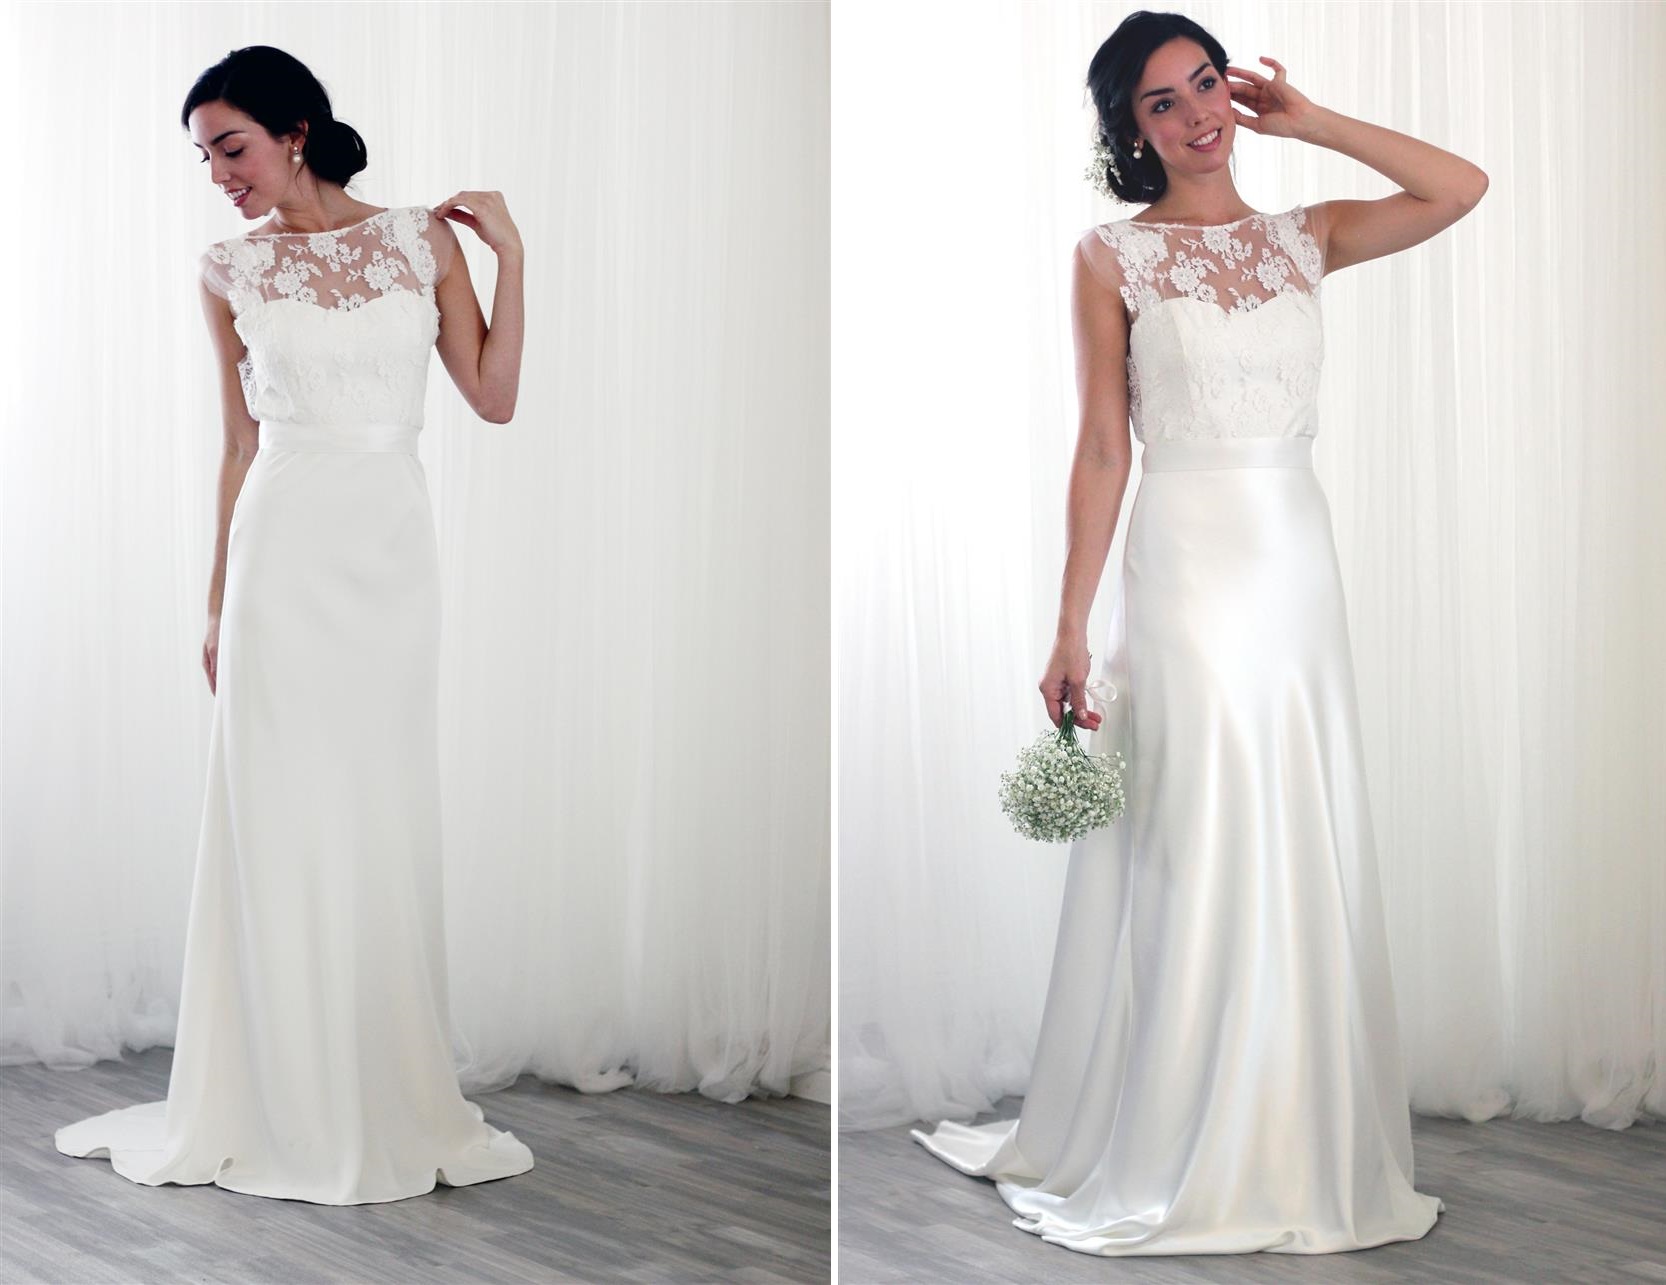 Rose & Delilah's 2015 Bridal Collection - Ophelia